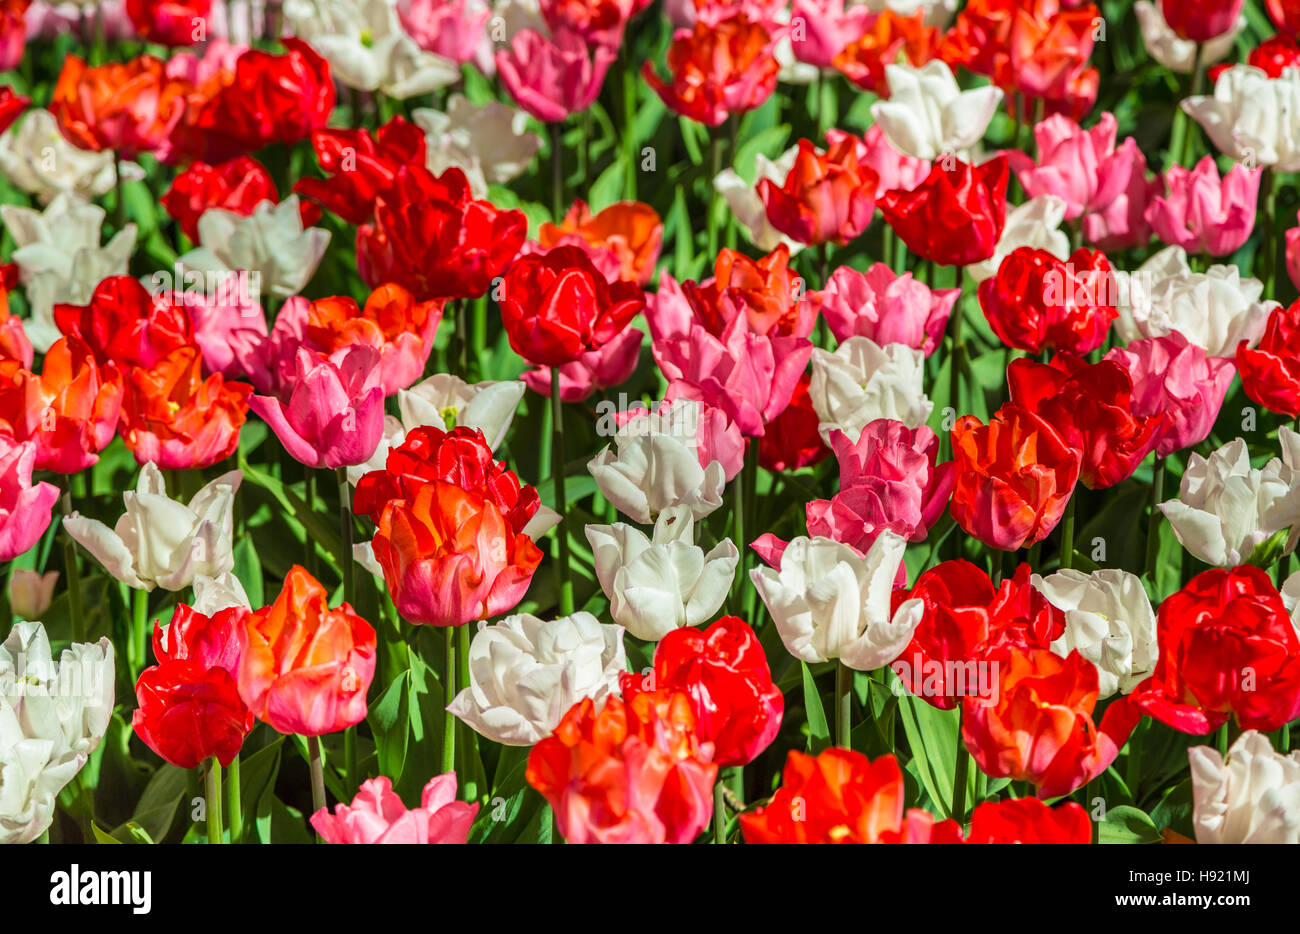 Glade of red, pink and white fresh tulips Stock Photo